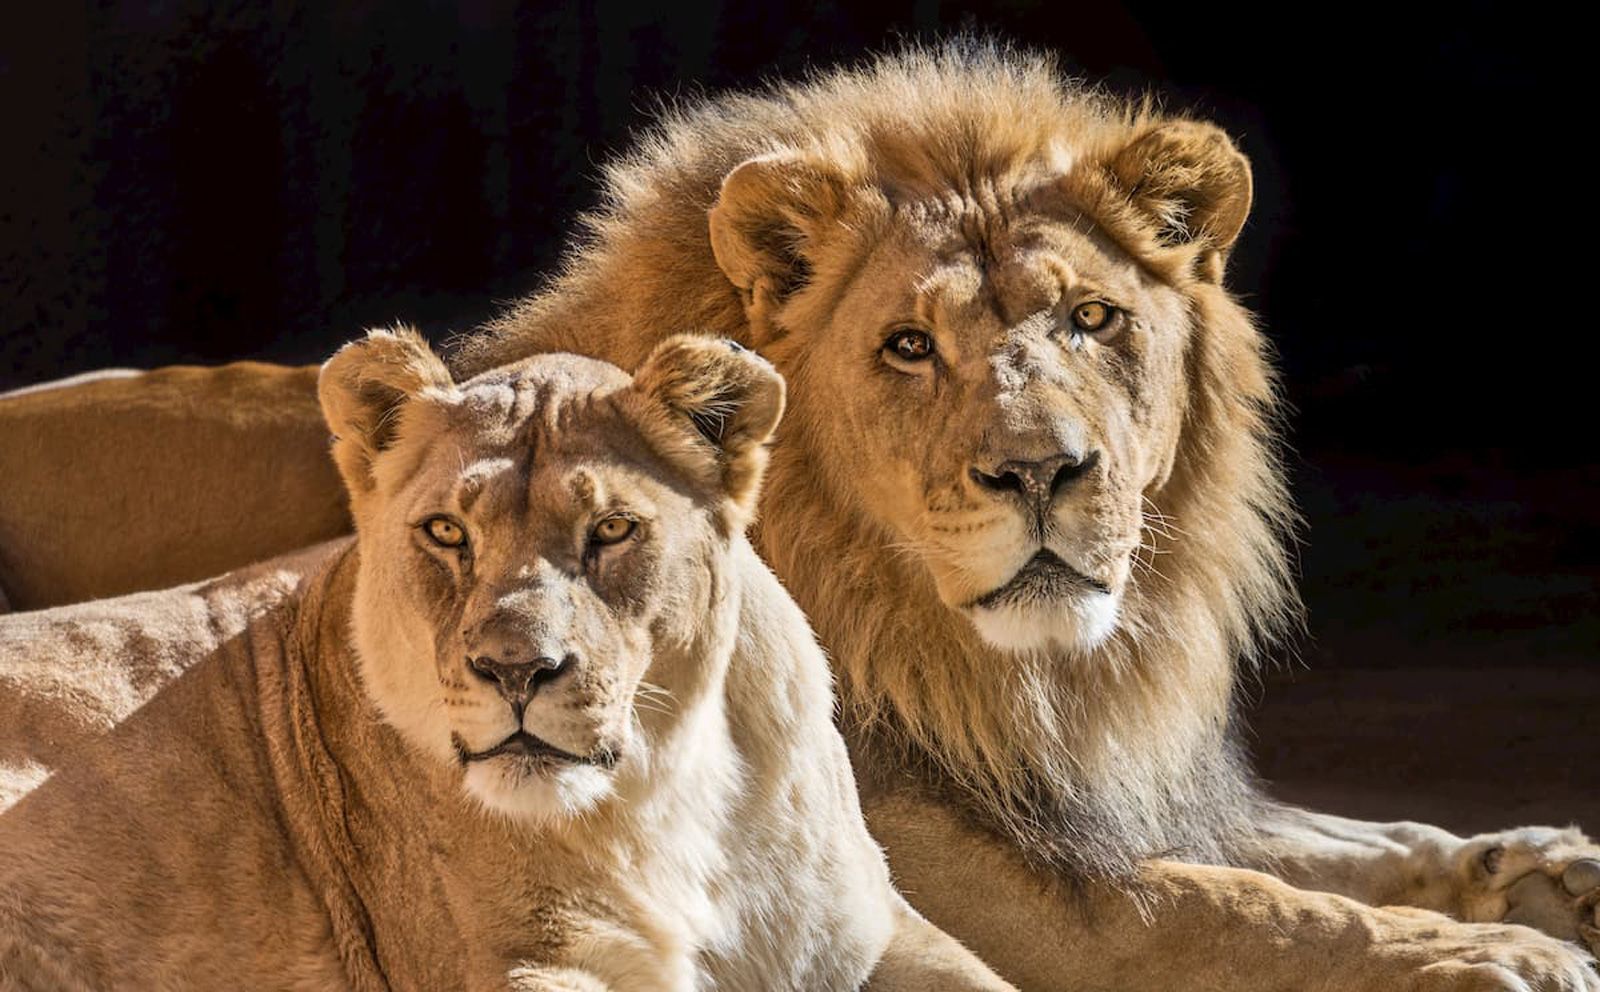 Hubert and Kalisa: . Zoo's African lions were euthanized after  age-related health problems | CNN